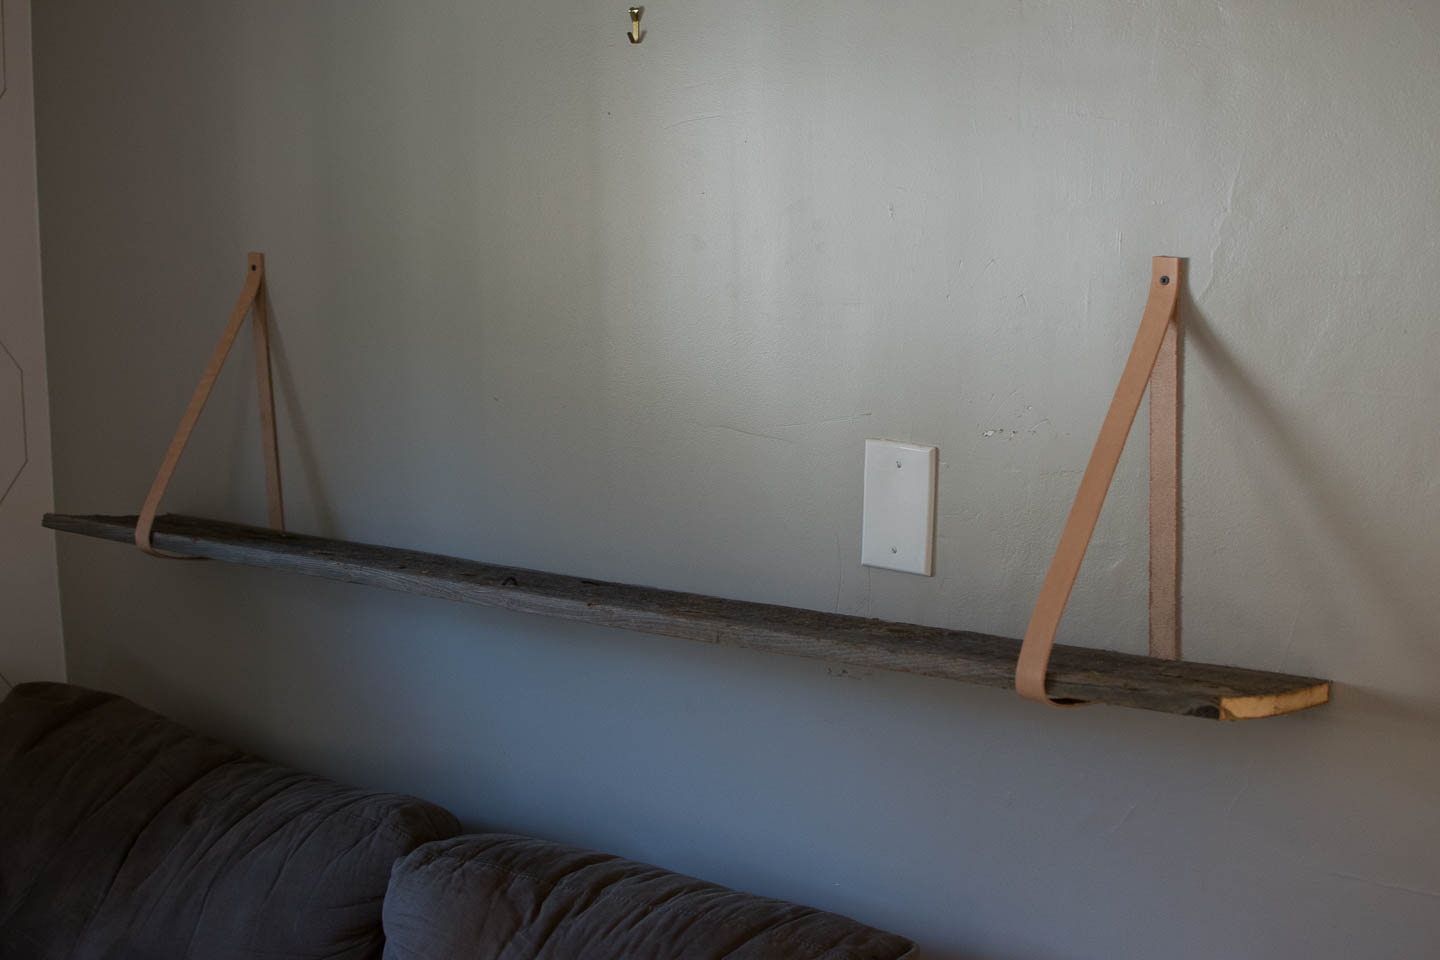 Simple DIY shelf with reclaimed wood and leather straps